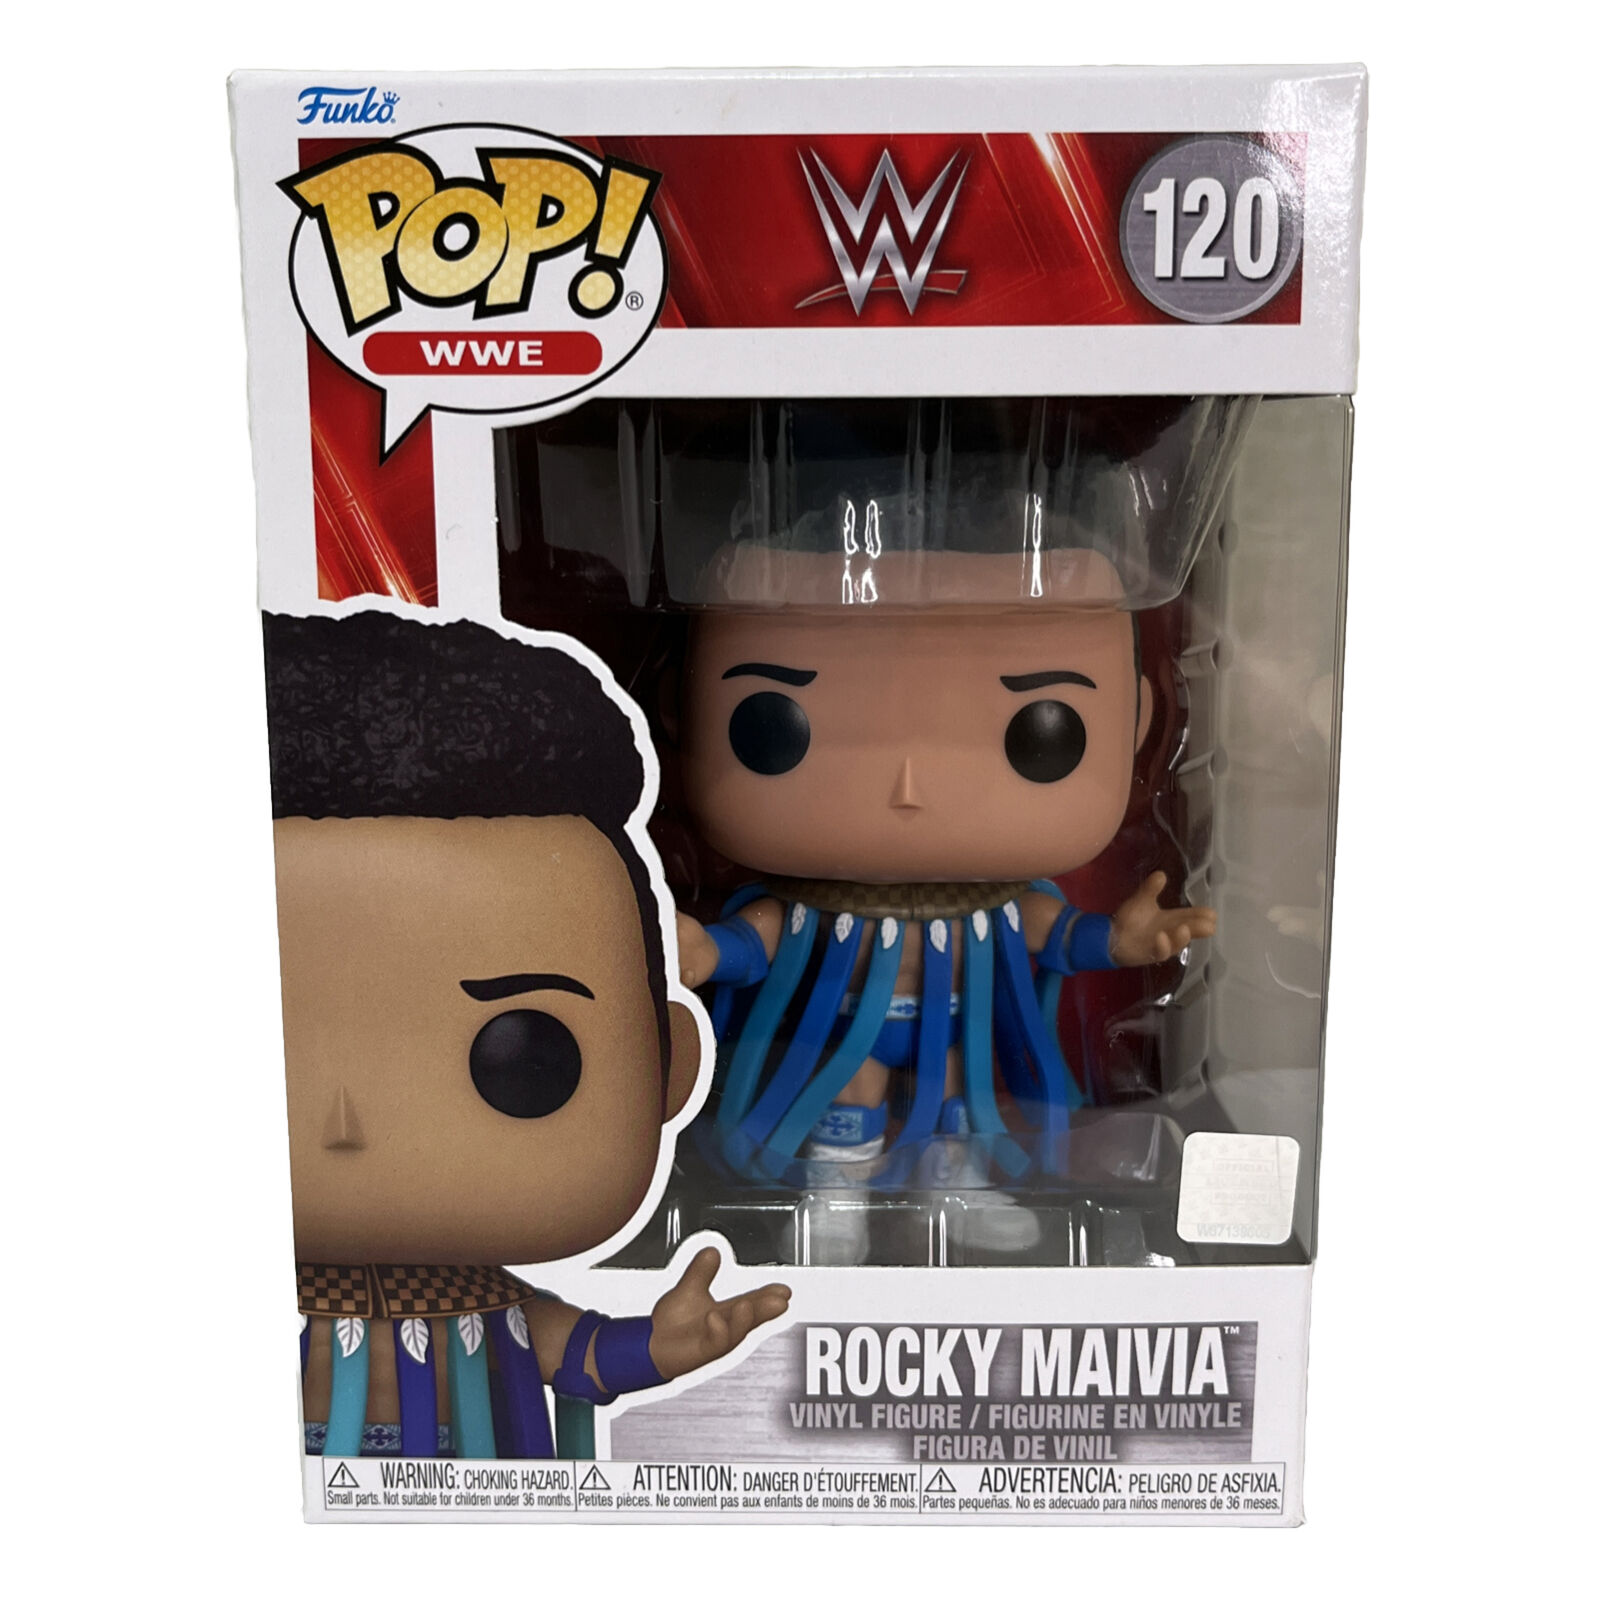 Funko Pop WWE The Rock Rocky Maivia 120 Toy Vinyl Figure Collectible WWF